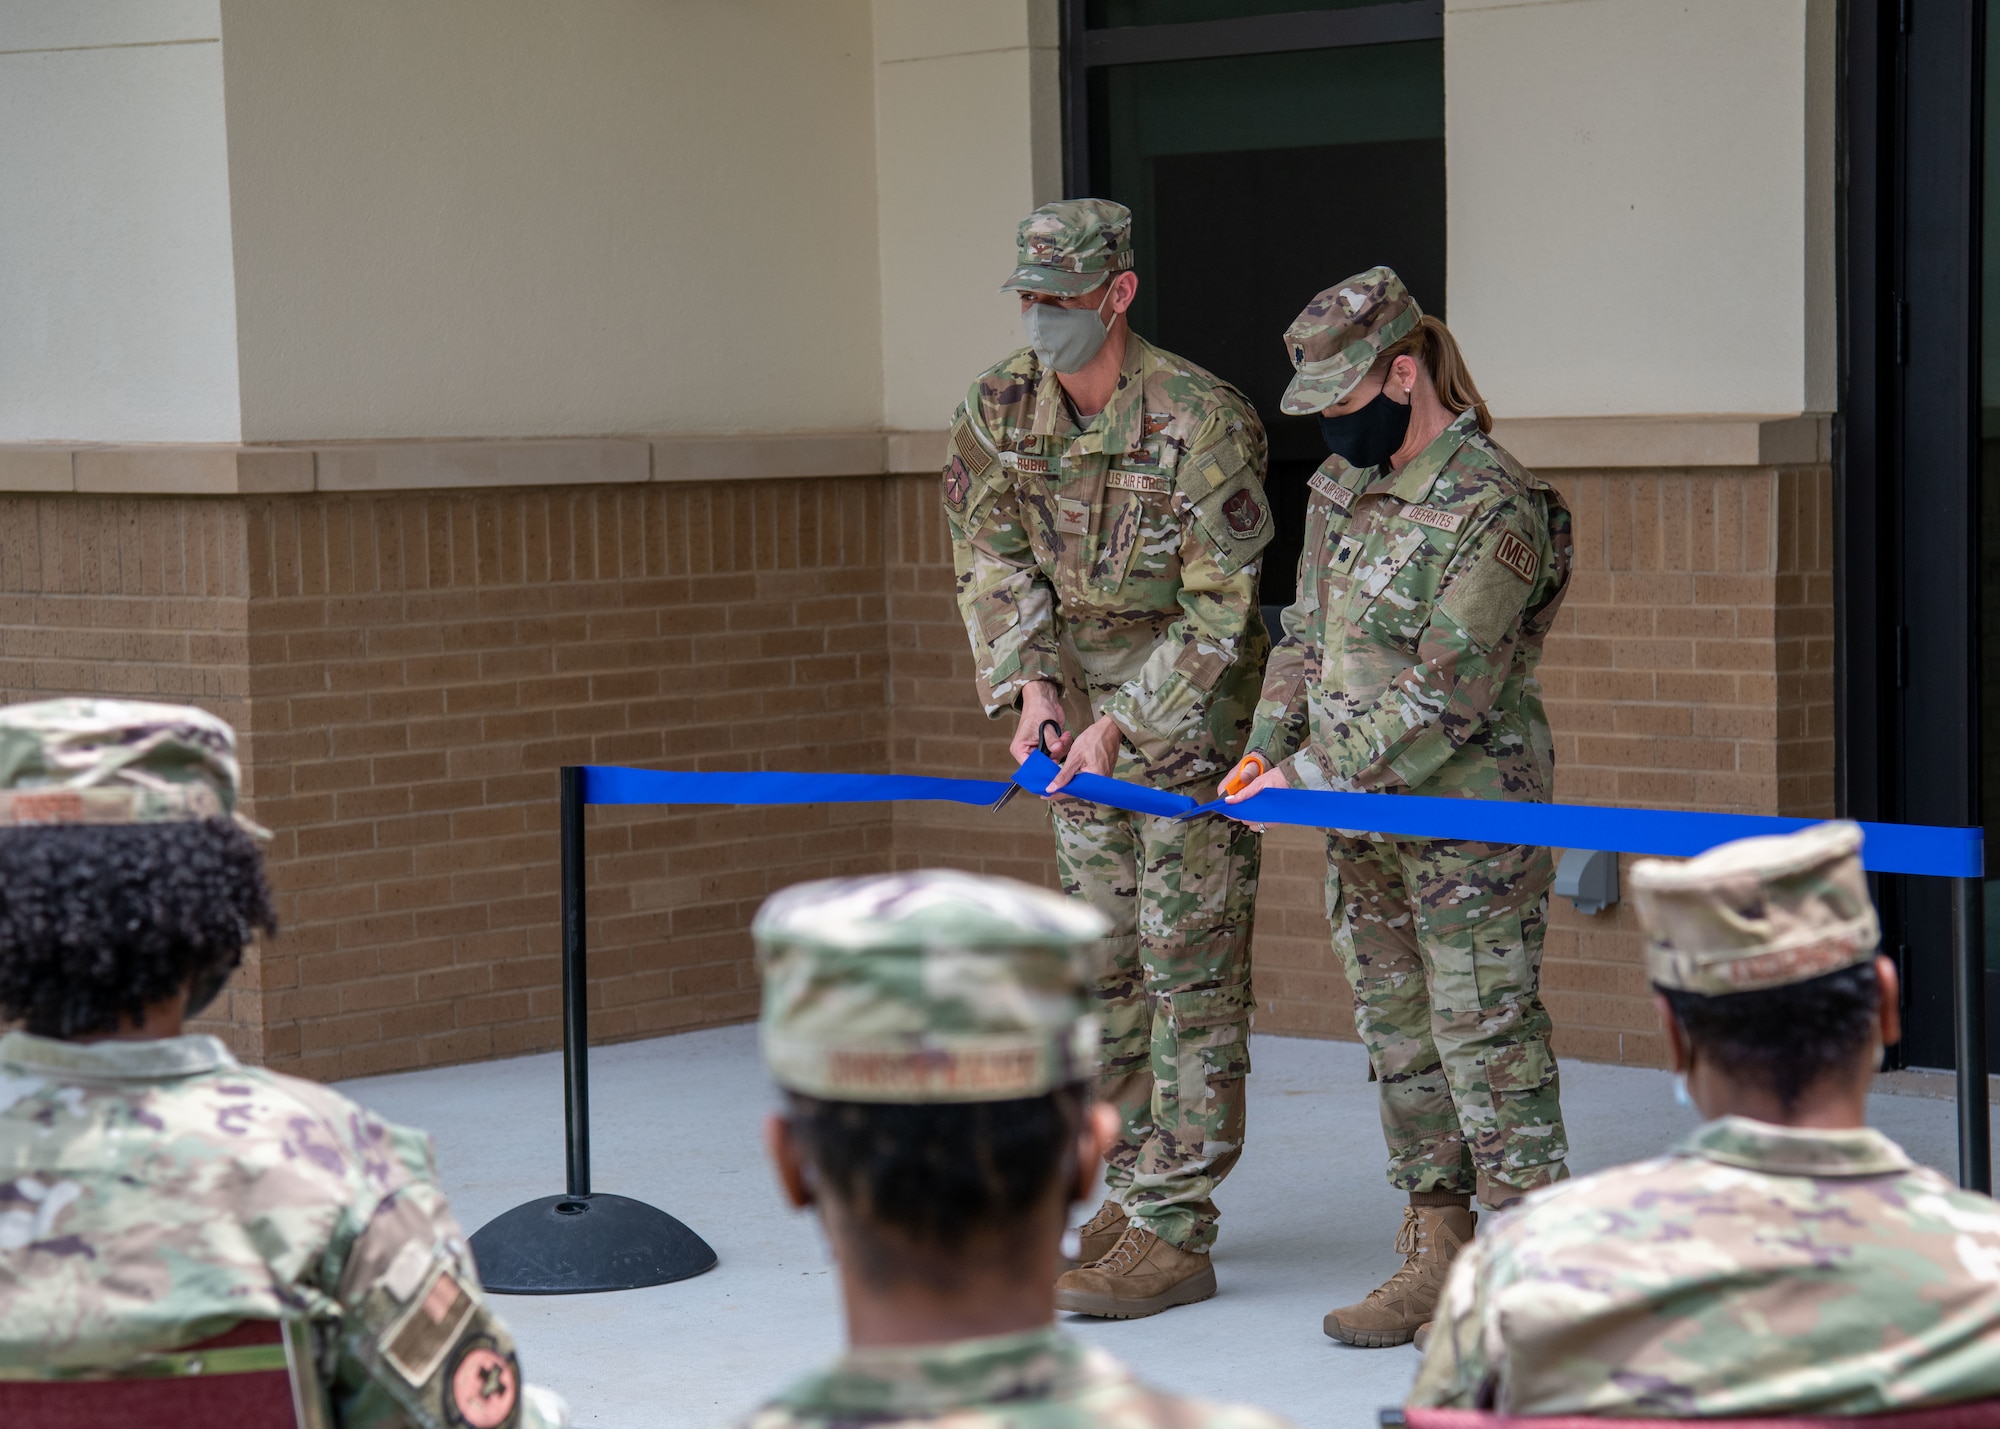 Col. Stuart M. Rubio, 403rd Wing commander, and Lt. Col. Lauren DeFrates, 403rd Aeromedical Staging Squadron deputy commander, cut the ceremonial ribbon marking the opening of the new ASTS building at Keesler Air Force Base, Miss., Aug. 6, 2021. The mission of the ASTS in-garrison is to ensure medical readiness for all 403rd Wing personnel. (U.S. Air Force by Staff Sgt. Kristen Pittman)